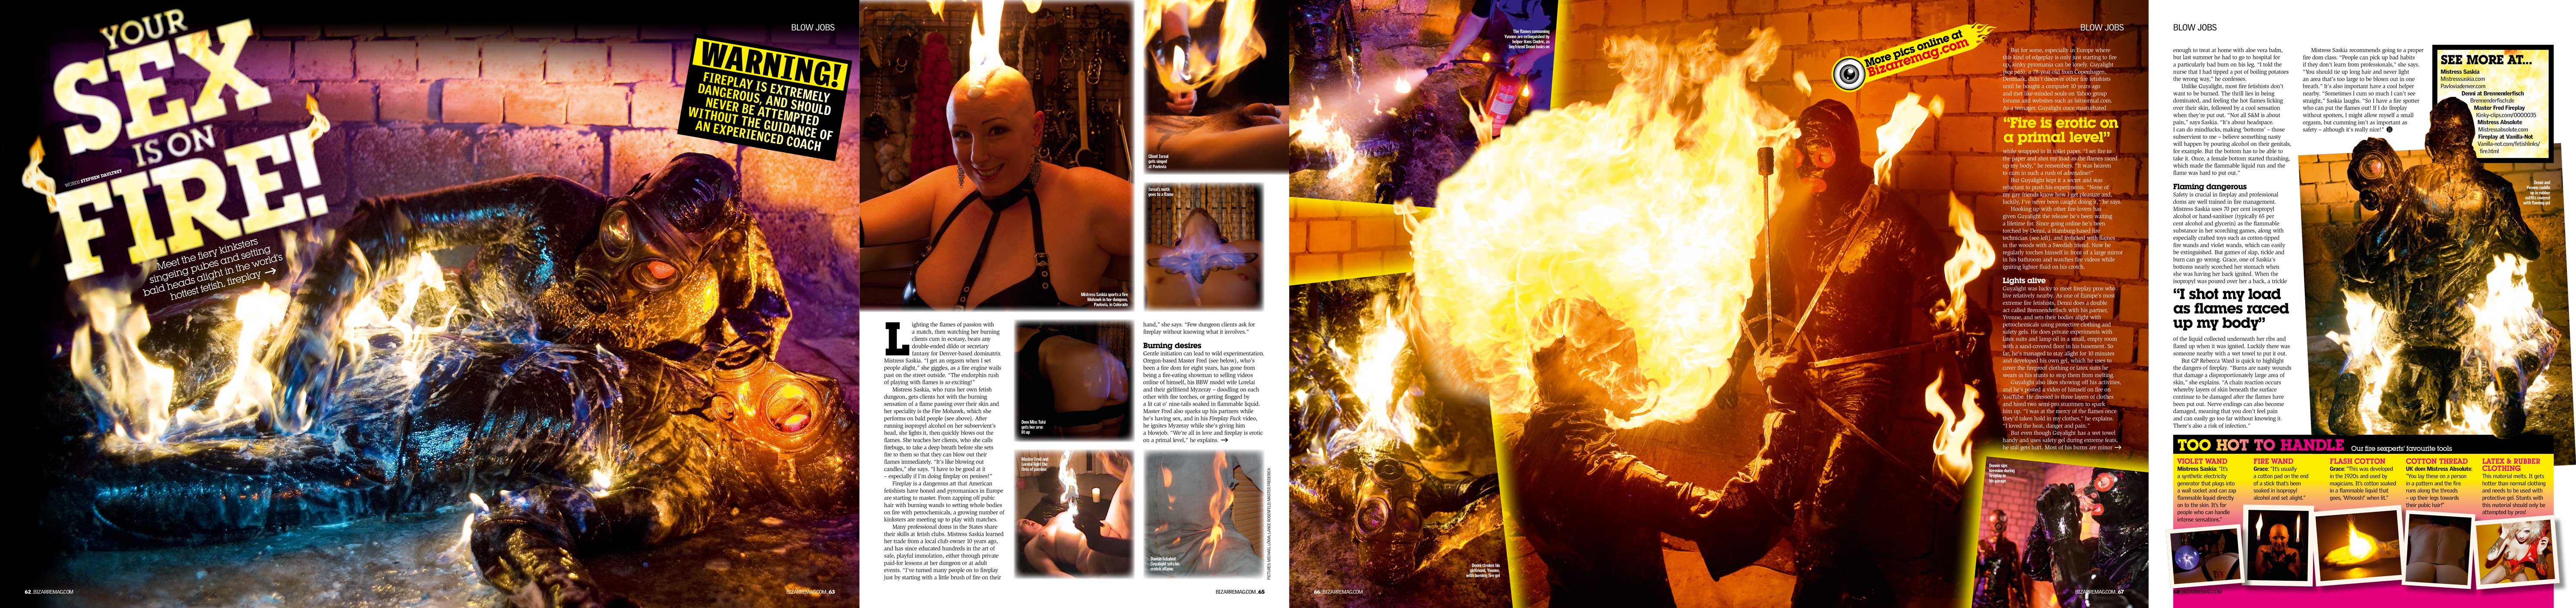 Fireplay fetishes (18+) — Bizarre Mag 2011